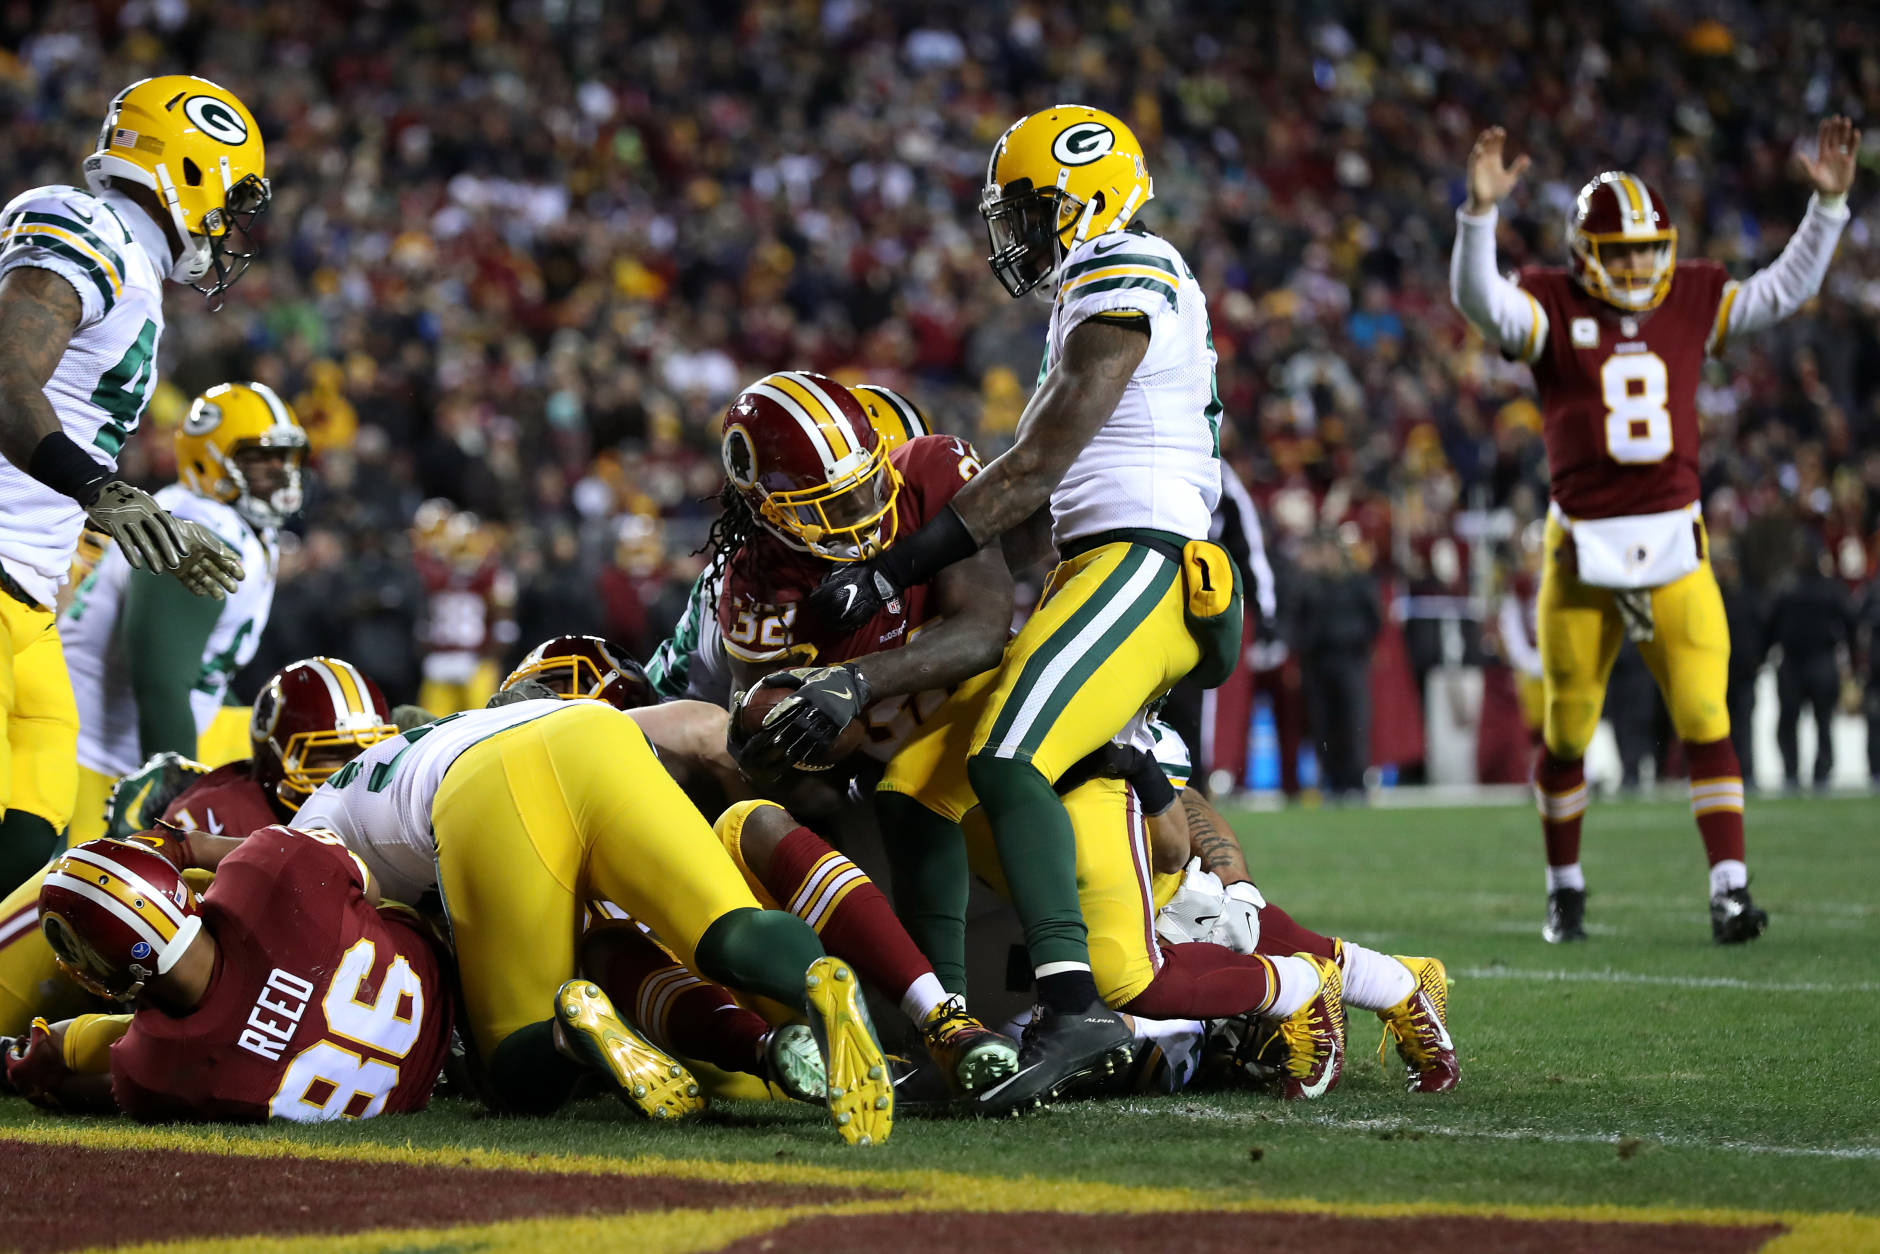 LANDOVER, MD - NOVEMBER 20: Running back Rob Kelley #32 of the Washington Redskins scores a fourth quarter touchdown while teammate quarterback Kirk Cousins #8 celebrates against the Green Bay Packers at FedExField on November 20, 2016 in Landover, Maryland. (Photo by Rob Carr/Getty Images)